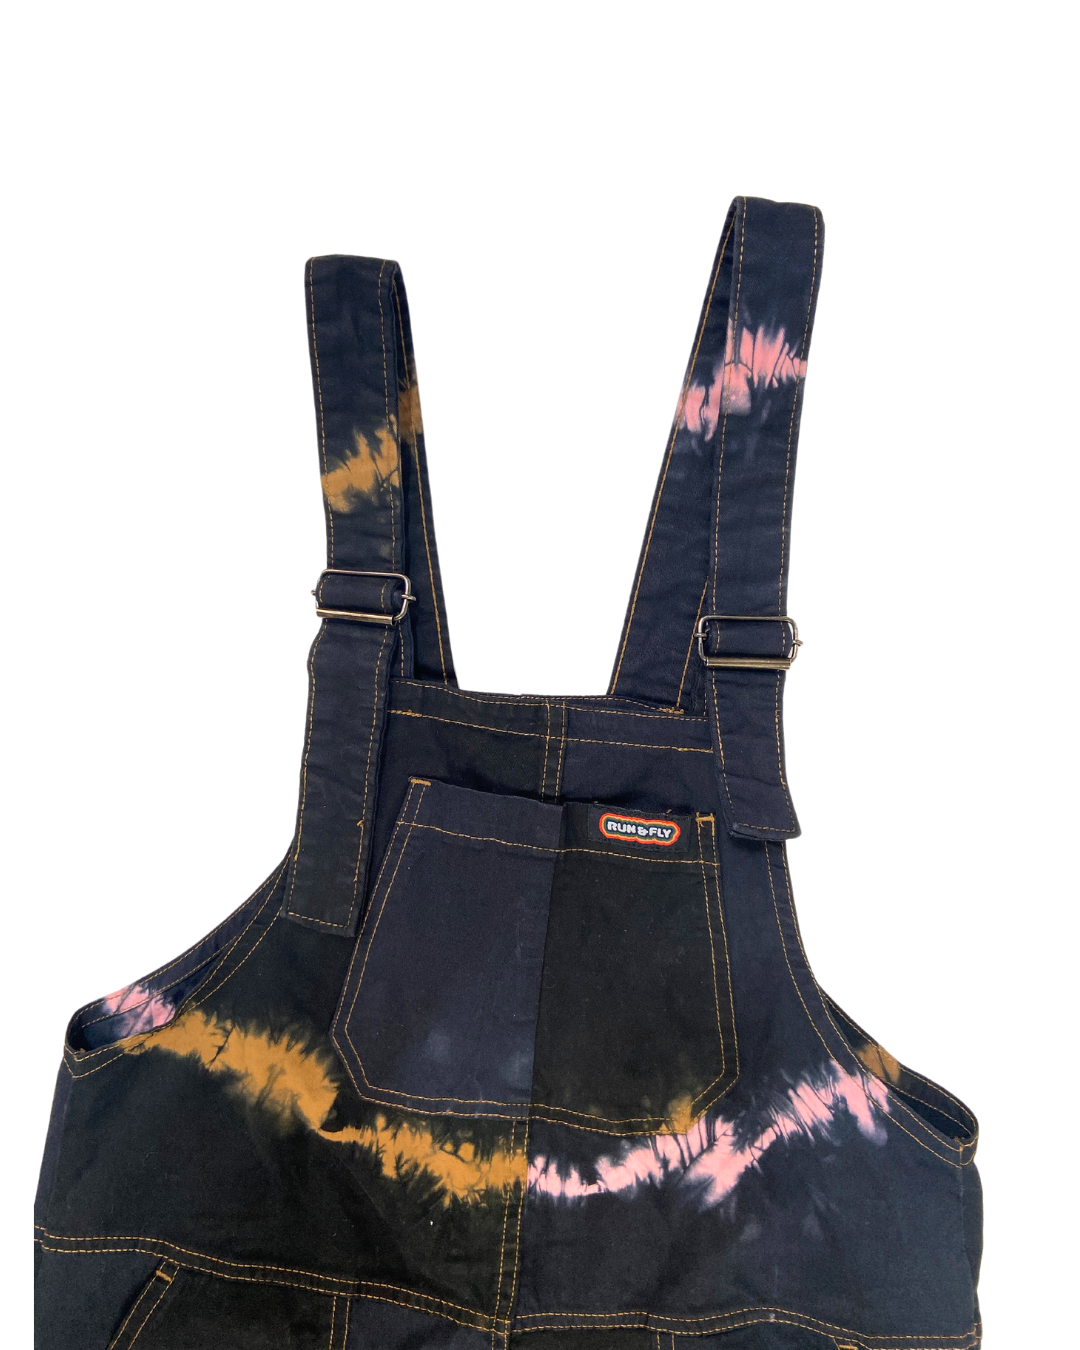 Run and Fly Tie-Dye Dungarees